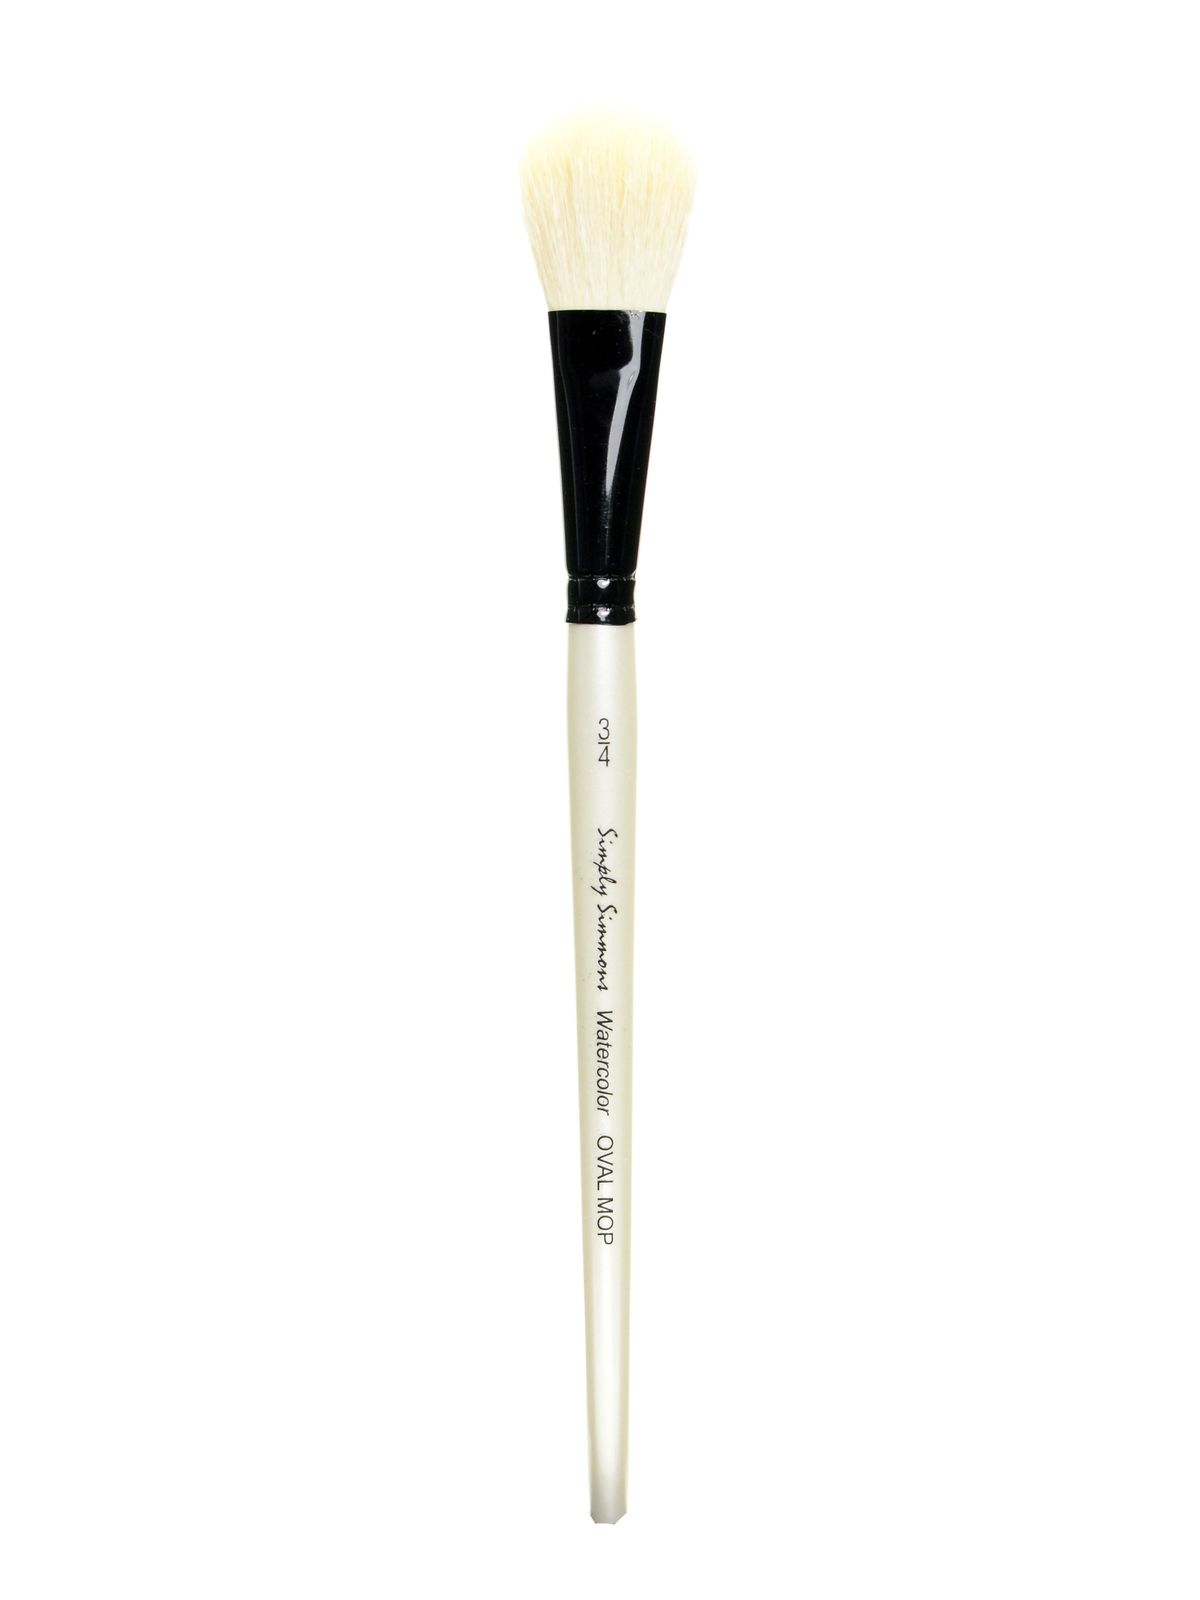 Simply Simmons Watercolor & Acrylic Short-handle Brushes 3 4 In. Oval Mop Natural White Goat